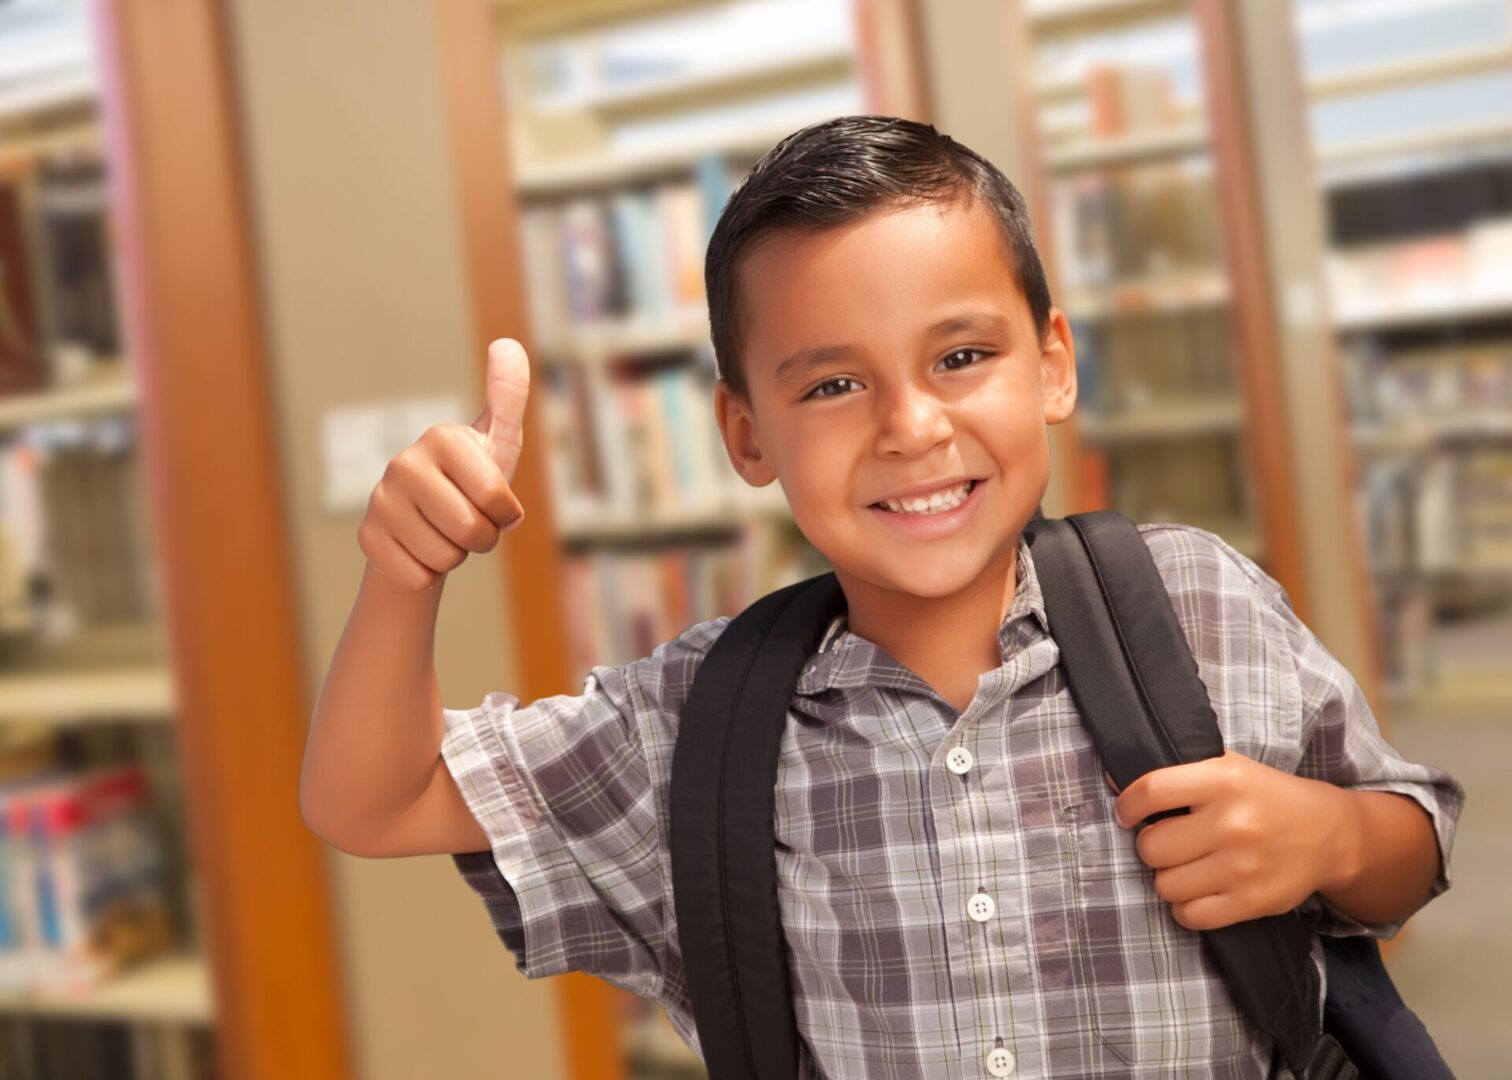 A boy with backpack giving thumbs up in library.